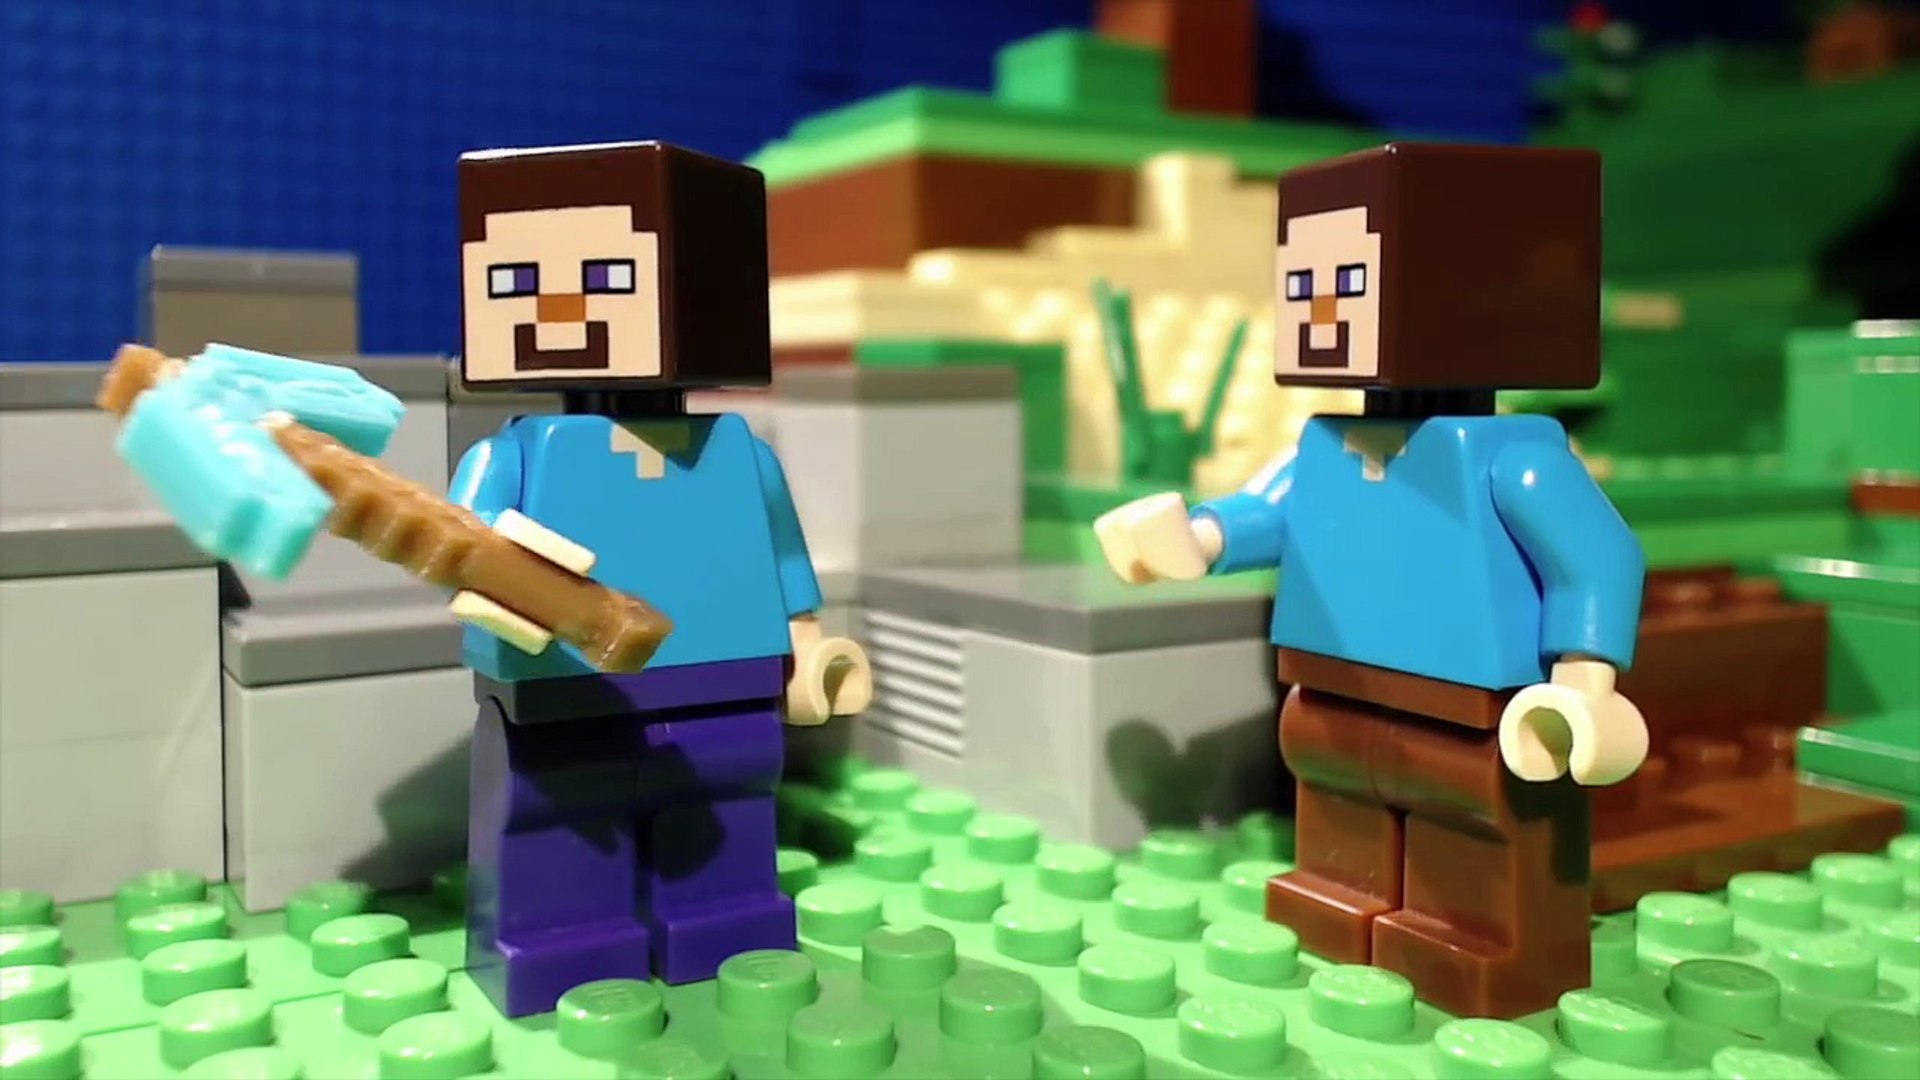 Lego Minecraft: Gold, Baby, Gold (stop motion animation / brickfilm) comedy  film - Dailymotion Video